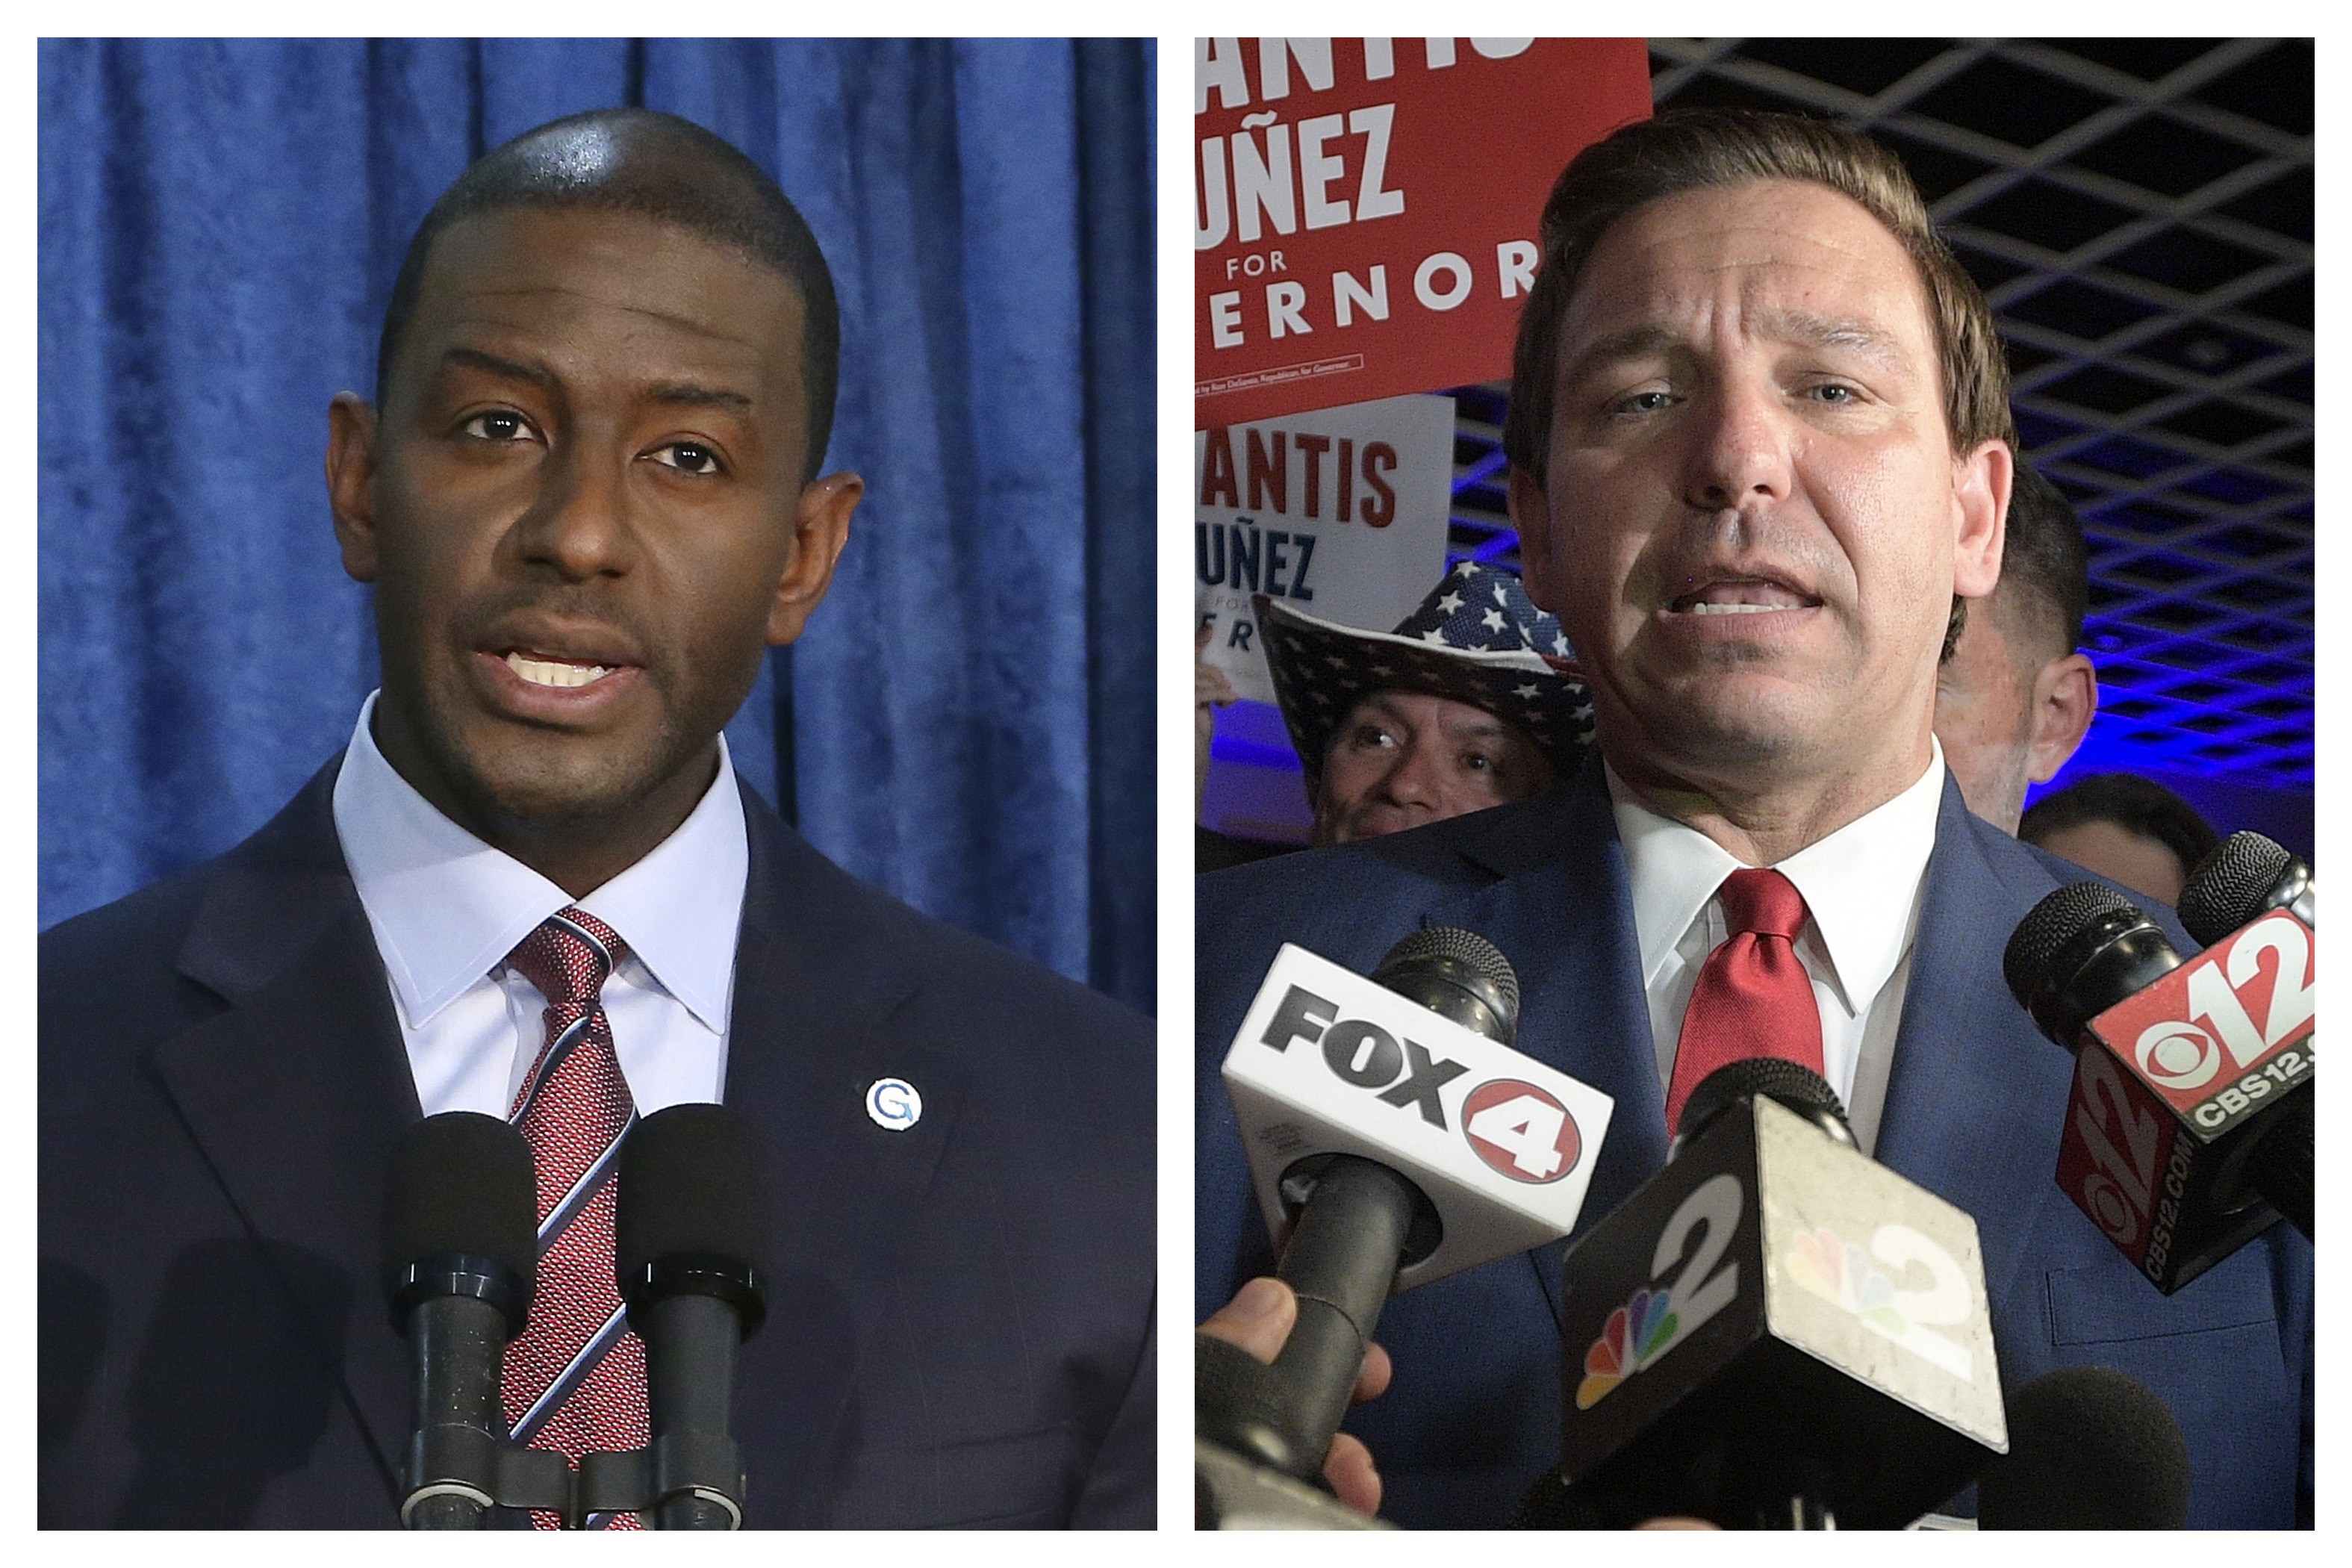 Andrew Gillum, left, the Democratic candidate for governor, and Republican candidate Ron DeSantis. Photo: AP Photo